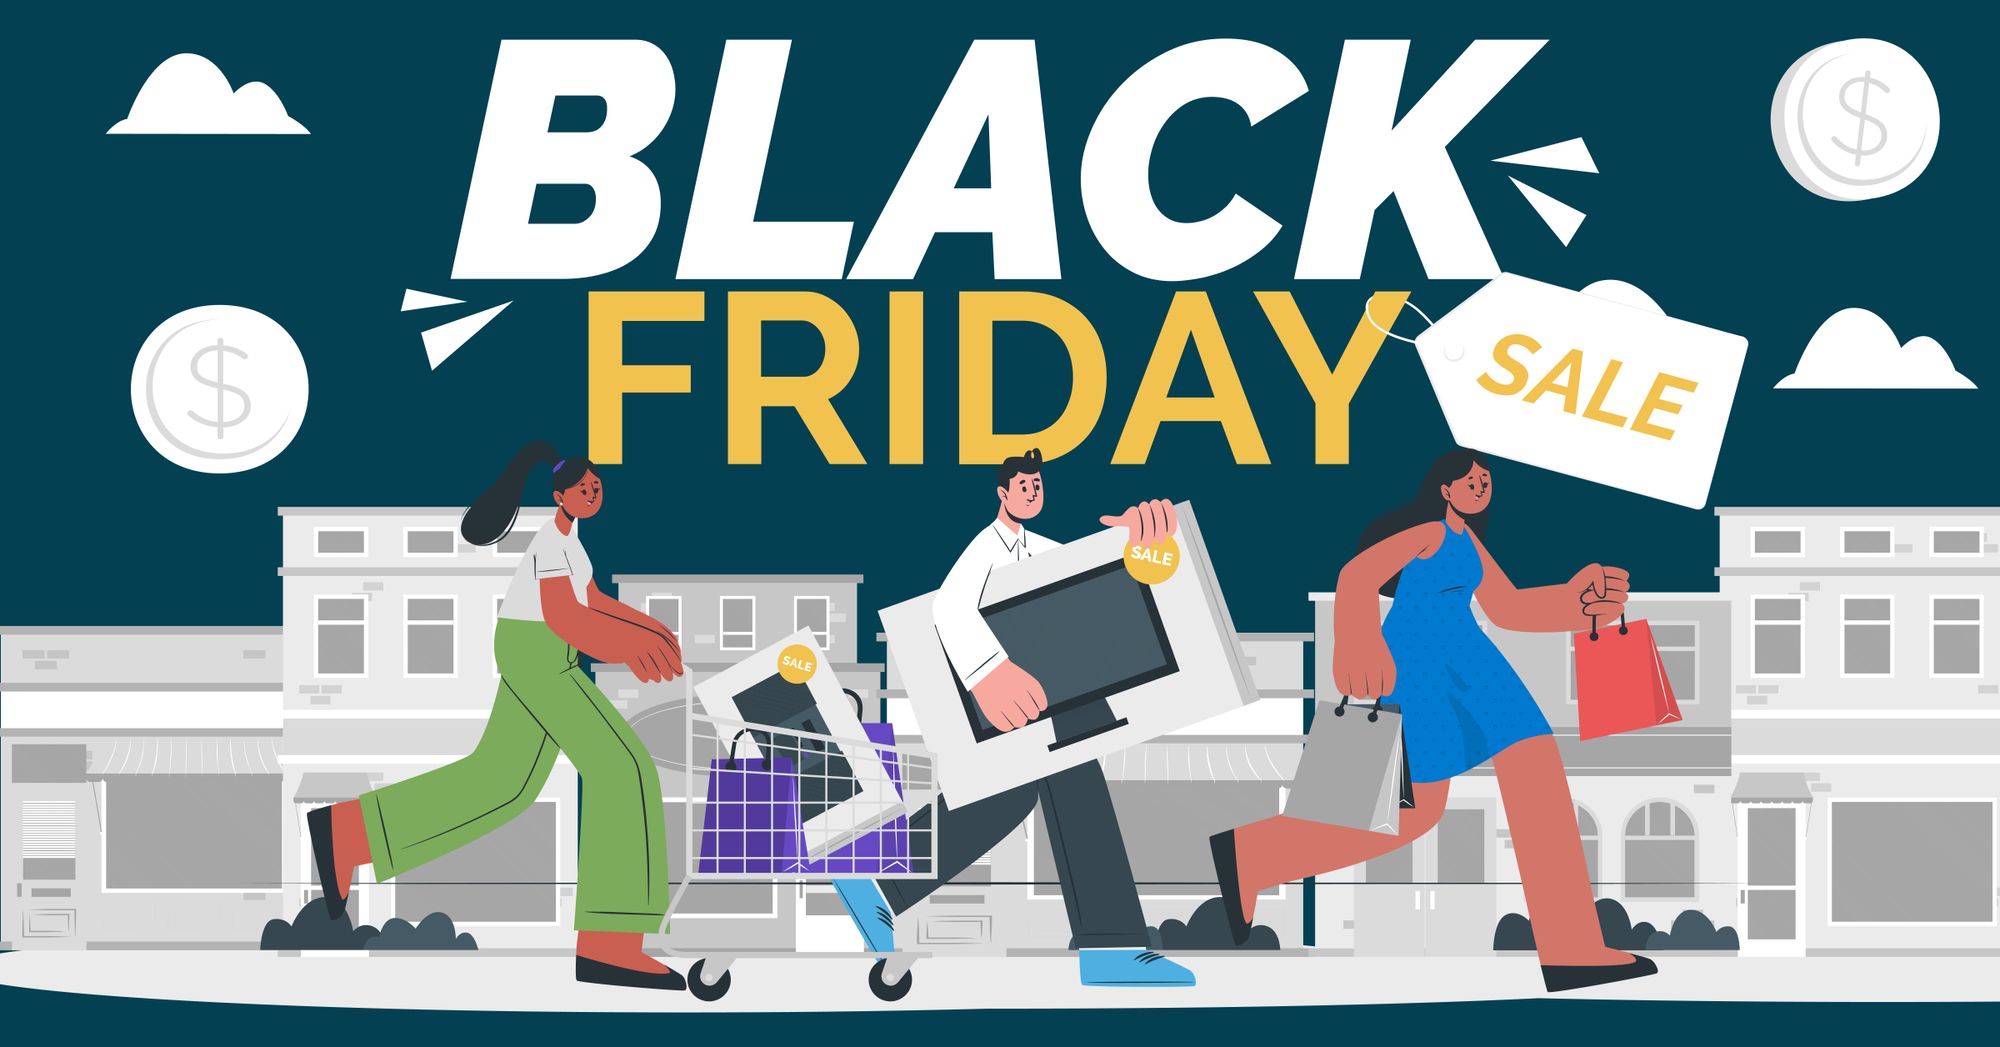 Black Friday 2022: 15 Best Things To Buy & 10 Worst Things To Buy